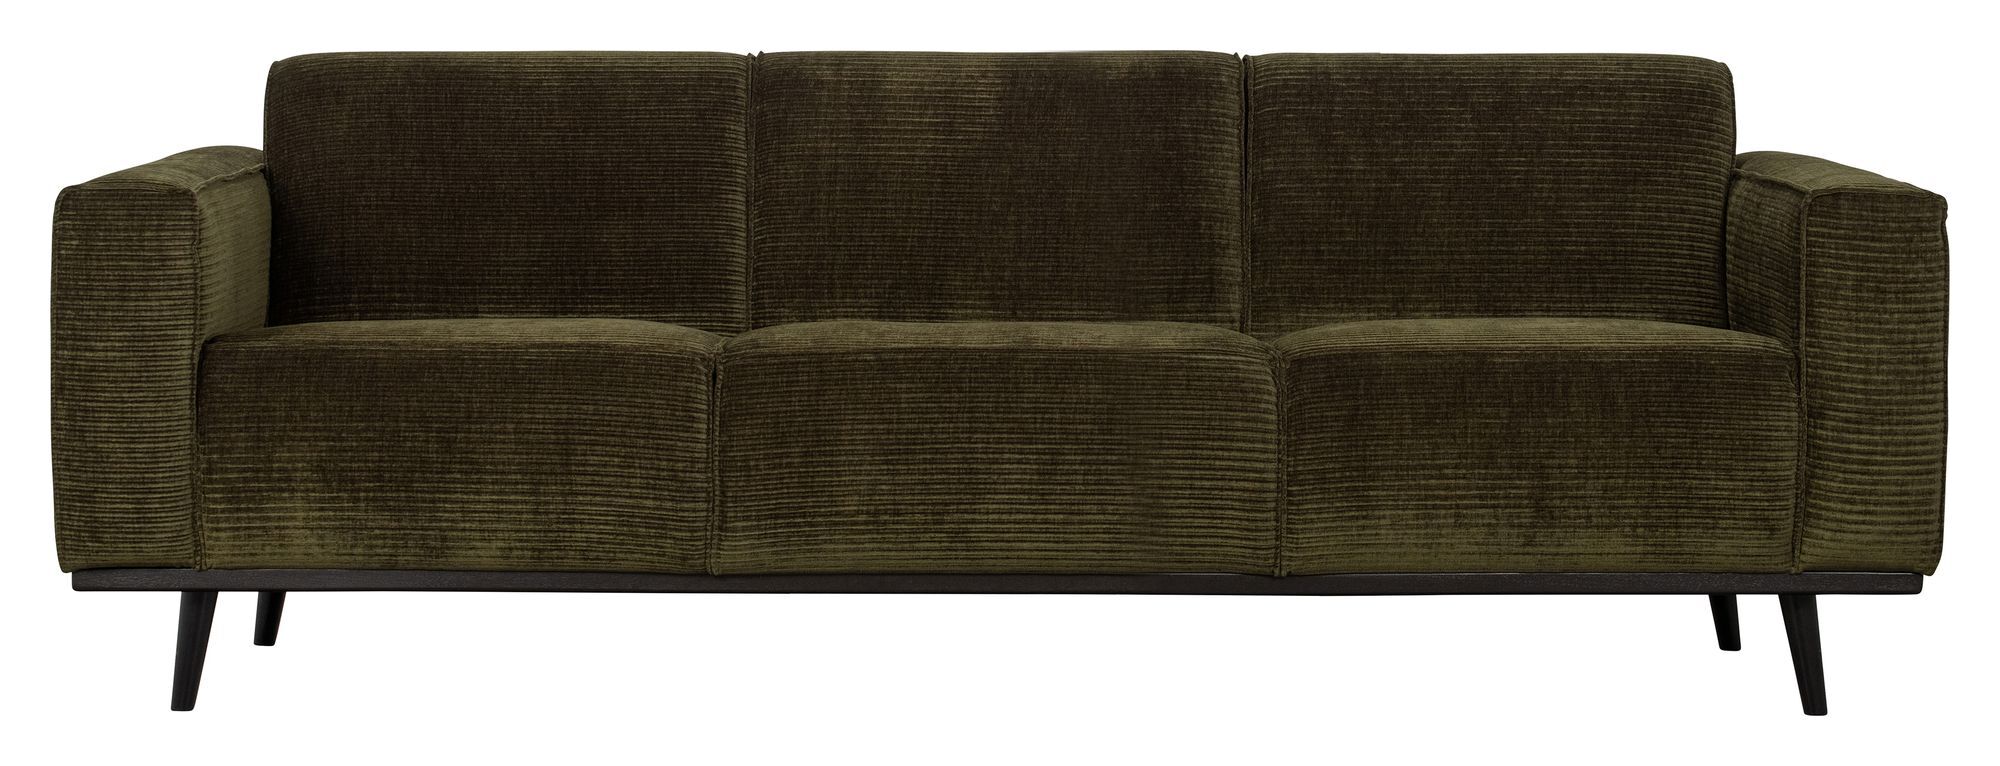 BePureHome Statement 3-pers. Sofa - Warm Green   Unoliving